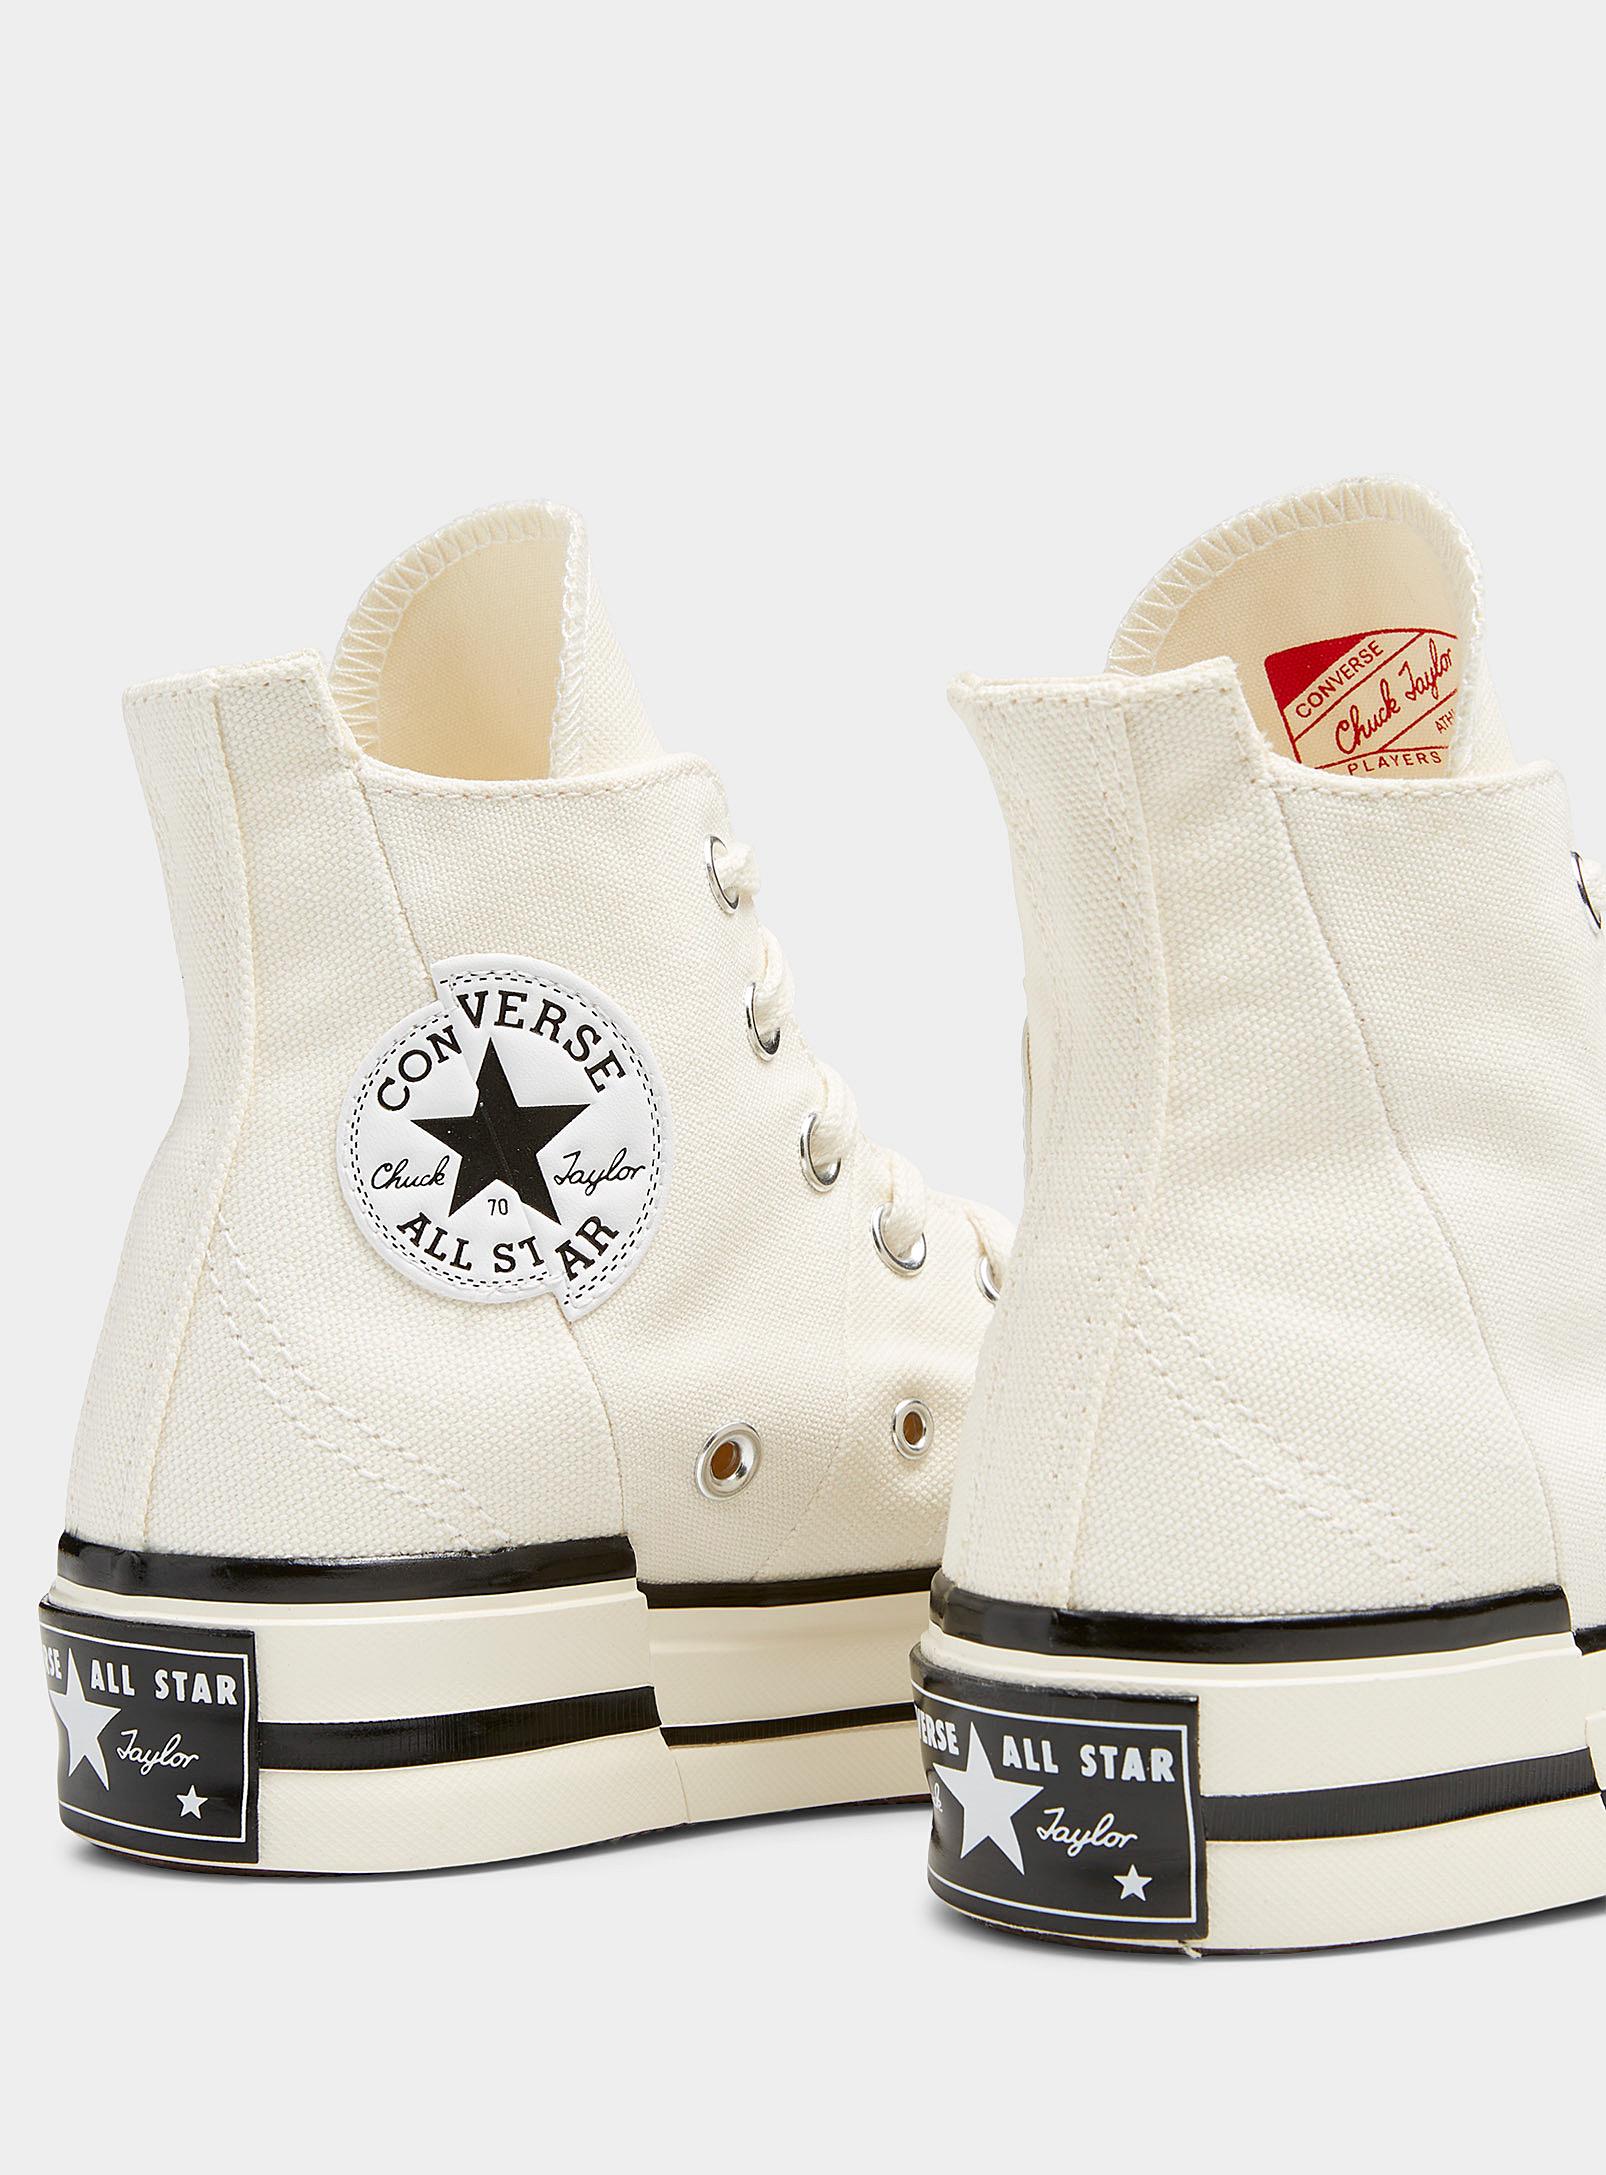 slecht Over instelling Verplicht Converse Deconstructed Chuck 70 Plus High Top White Sneakers Women in Red |  Lyst